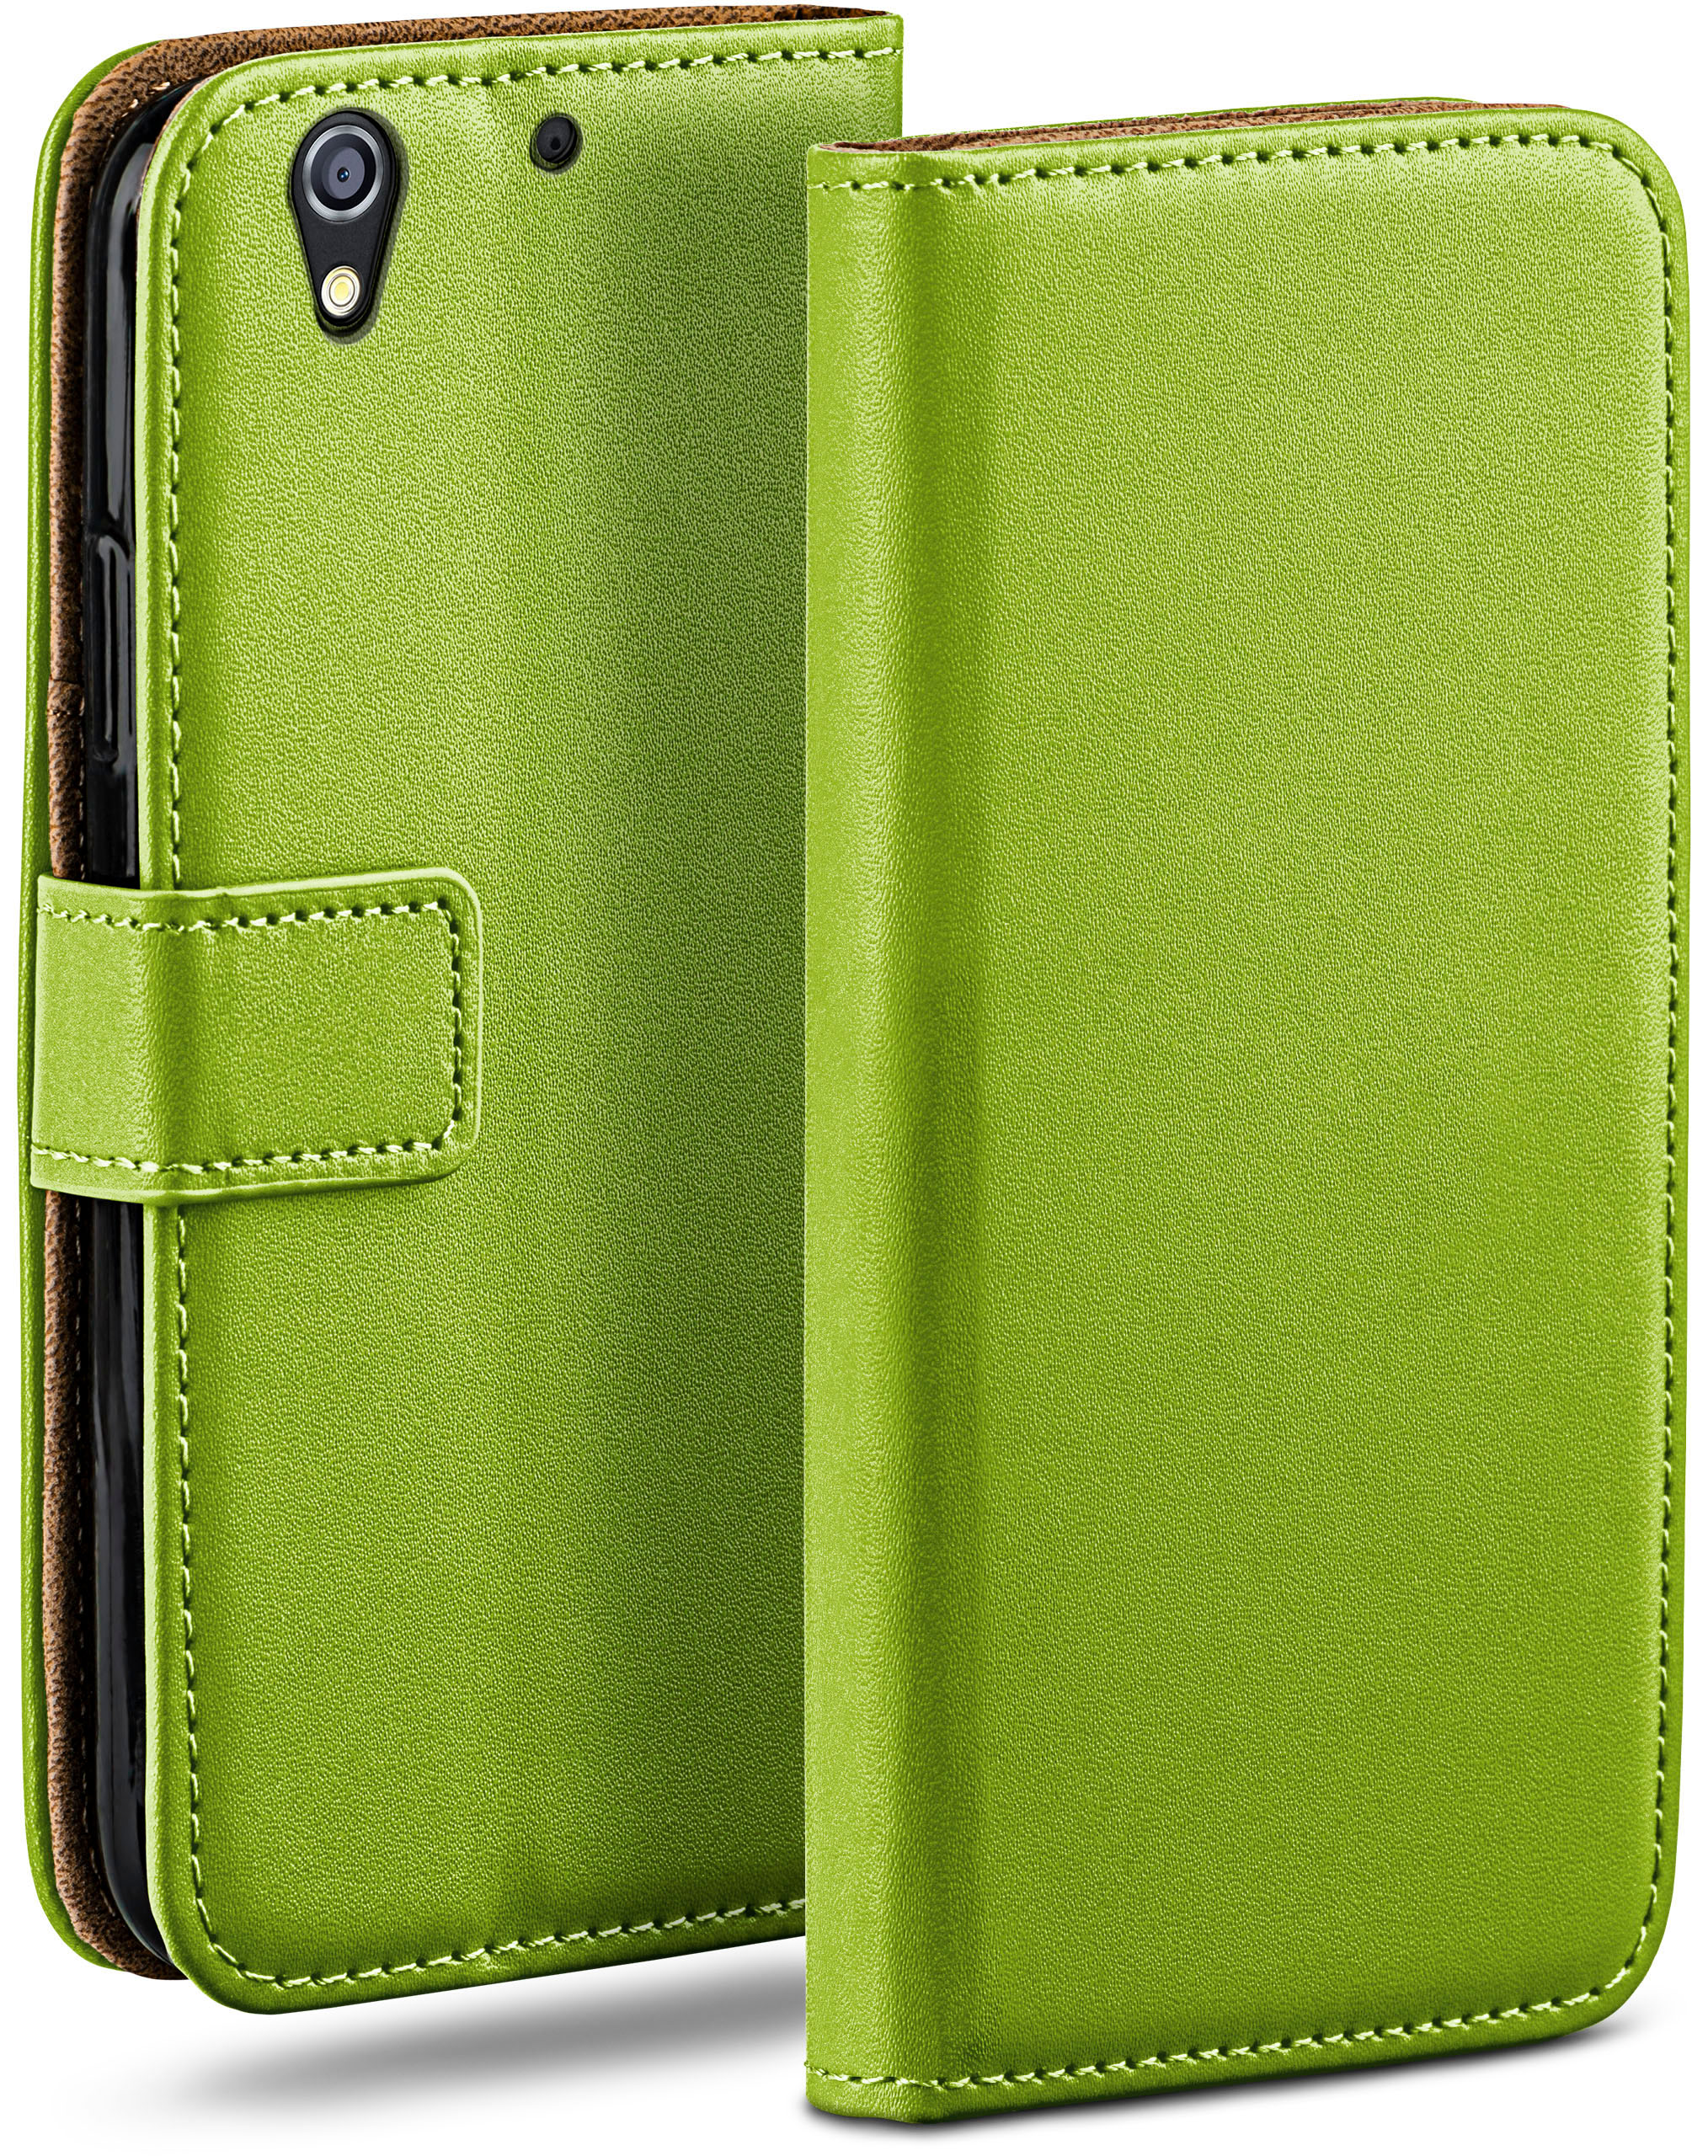 MOEX Book Case, 626G, HTC, Lime-Green Bookcover, Desire